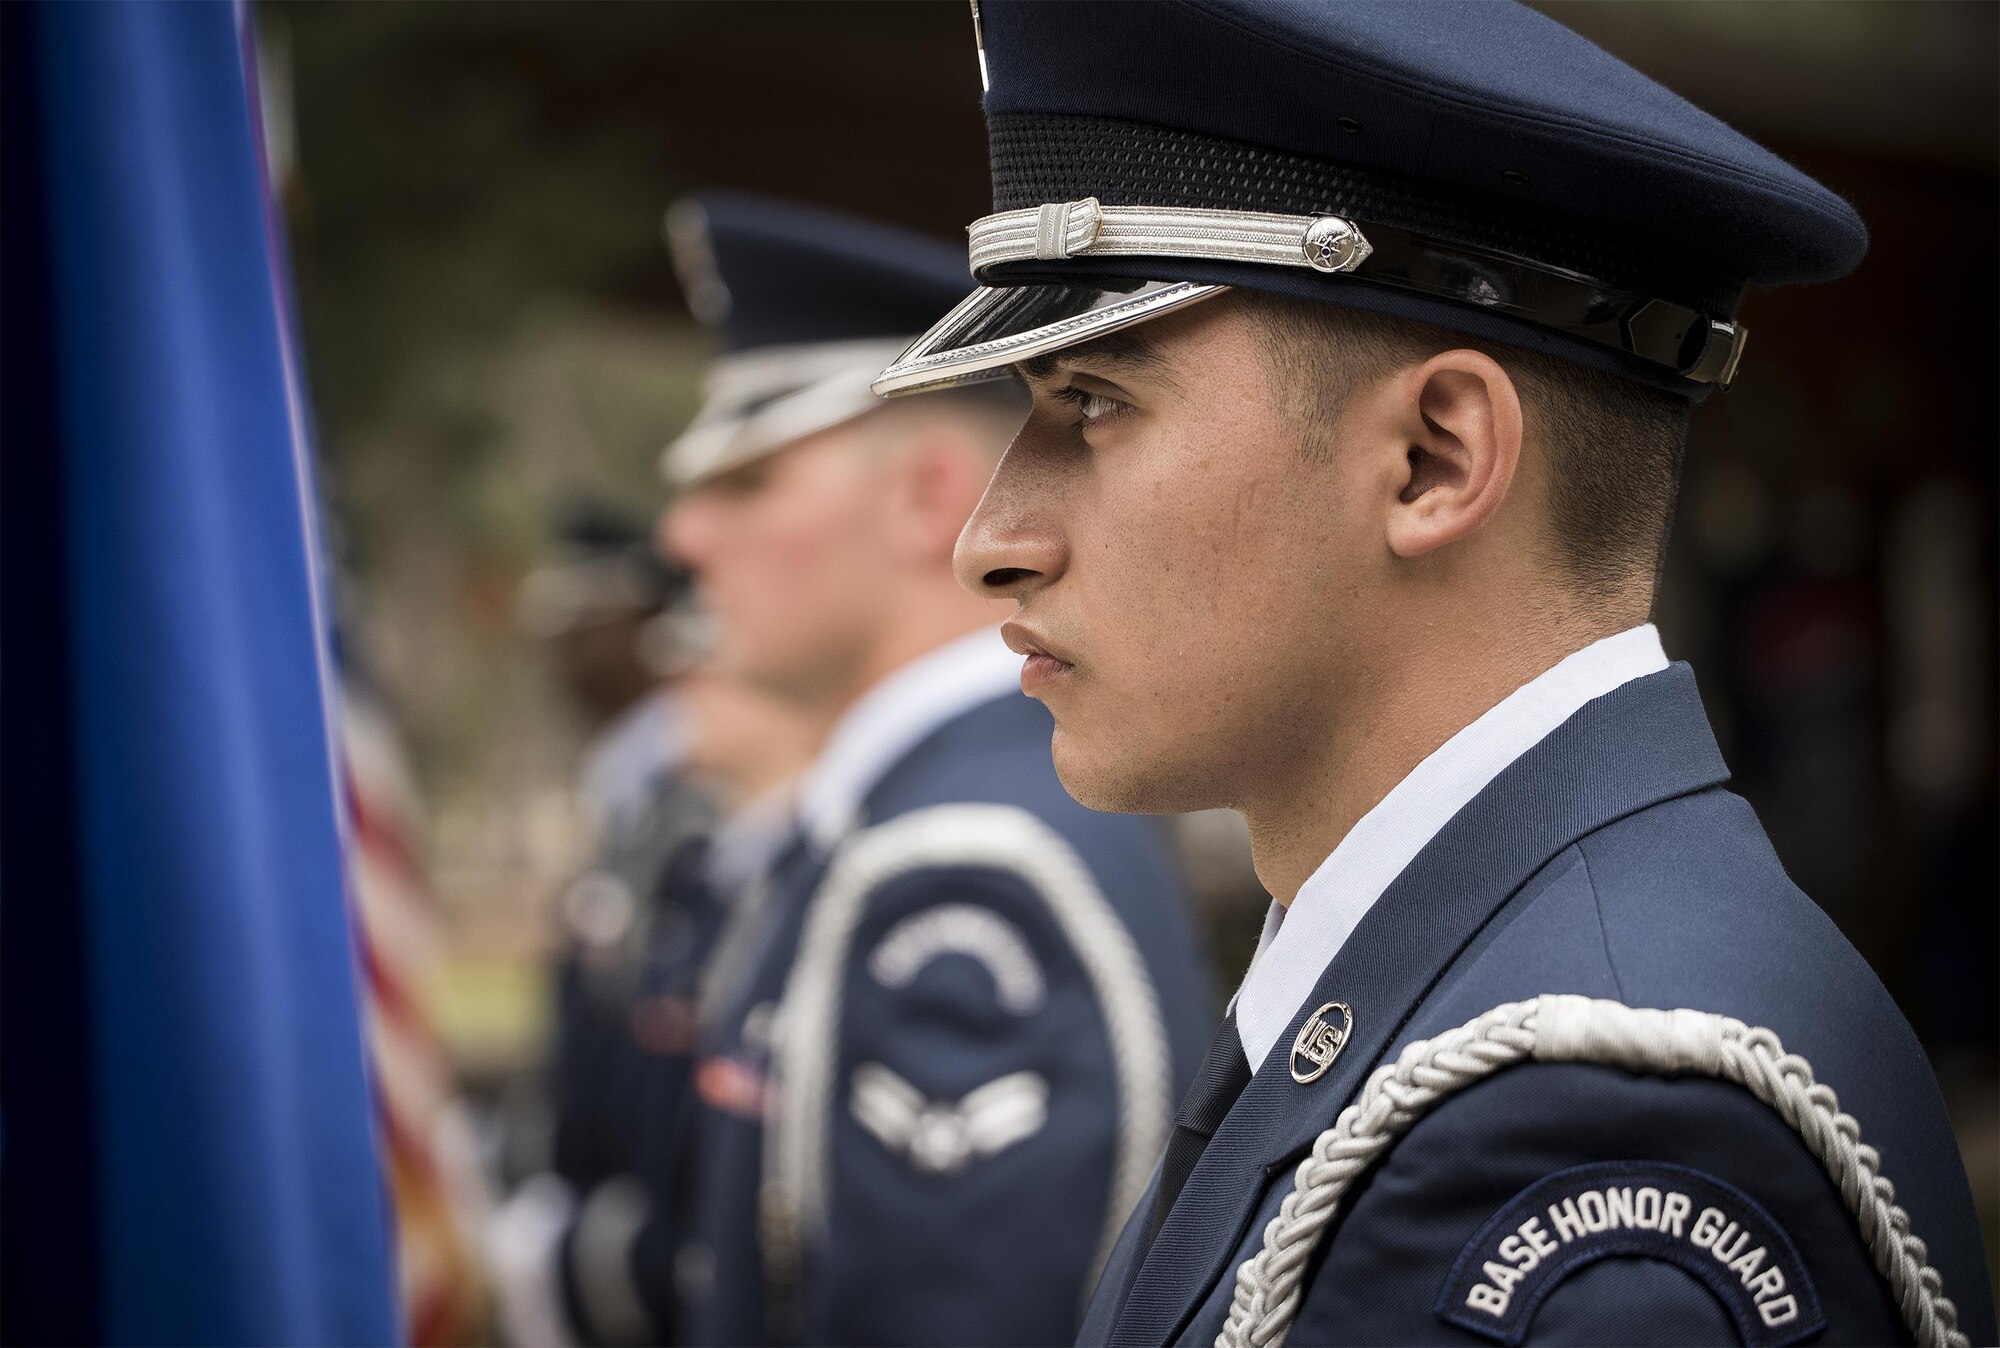 Senior Airman Blake Banning, 33rd Maintenance Squadron stands in a row of new Honor Guard Airmen prior to the unit’s graduation ceremony at Eglin Air Force Base, Fla., March 1.  Approximately 12 new Airmen graduated from the 120-plus-hour course. The graduation performance includes flag detail, rifle volley, pall bearers and bugler for friends, family and unit commanders. (U.S. Air Force photo/Samuel King Jr.)